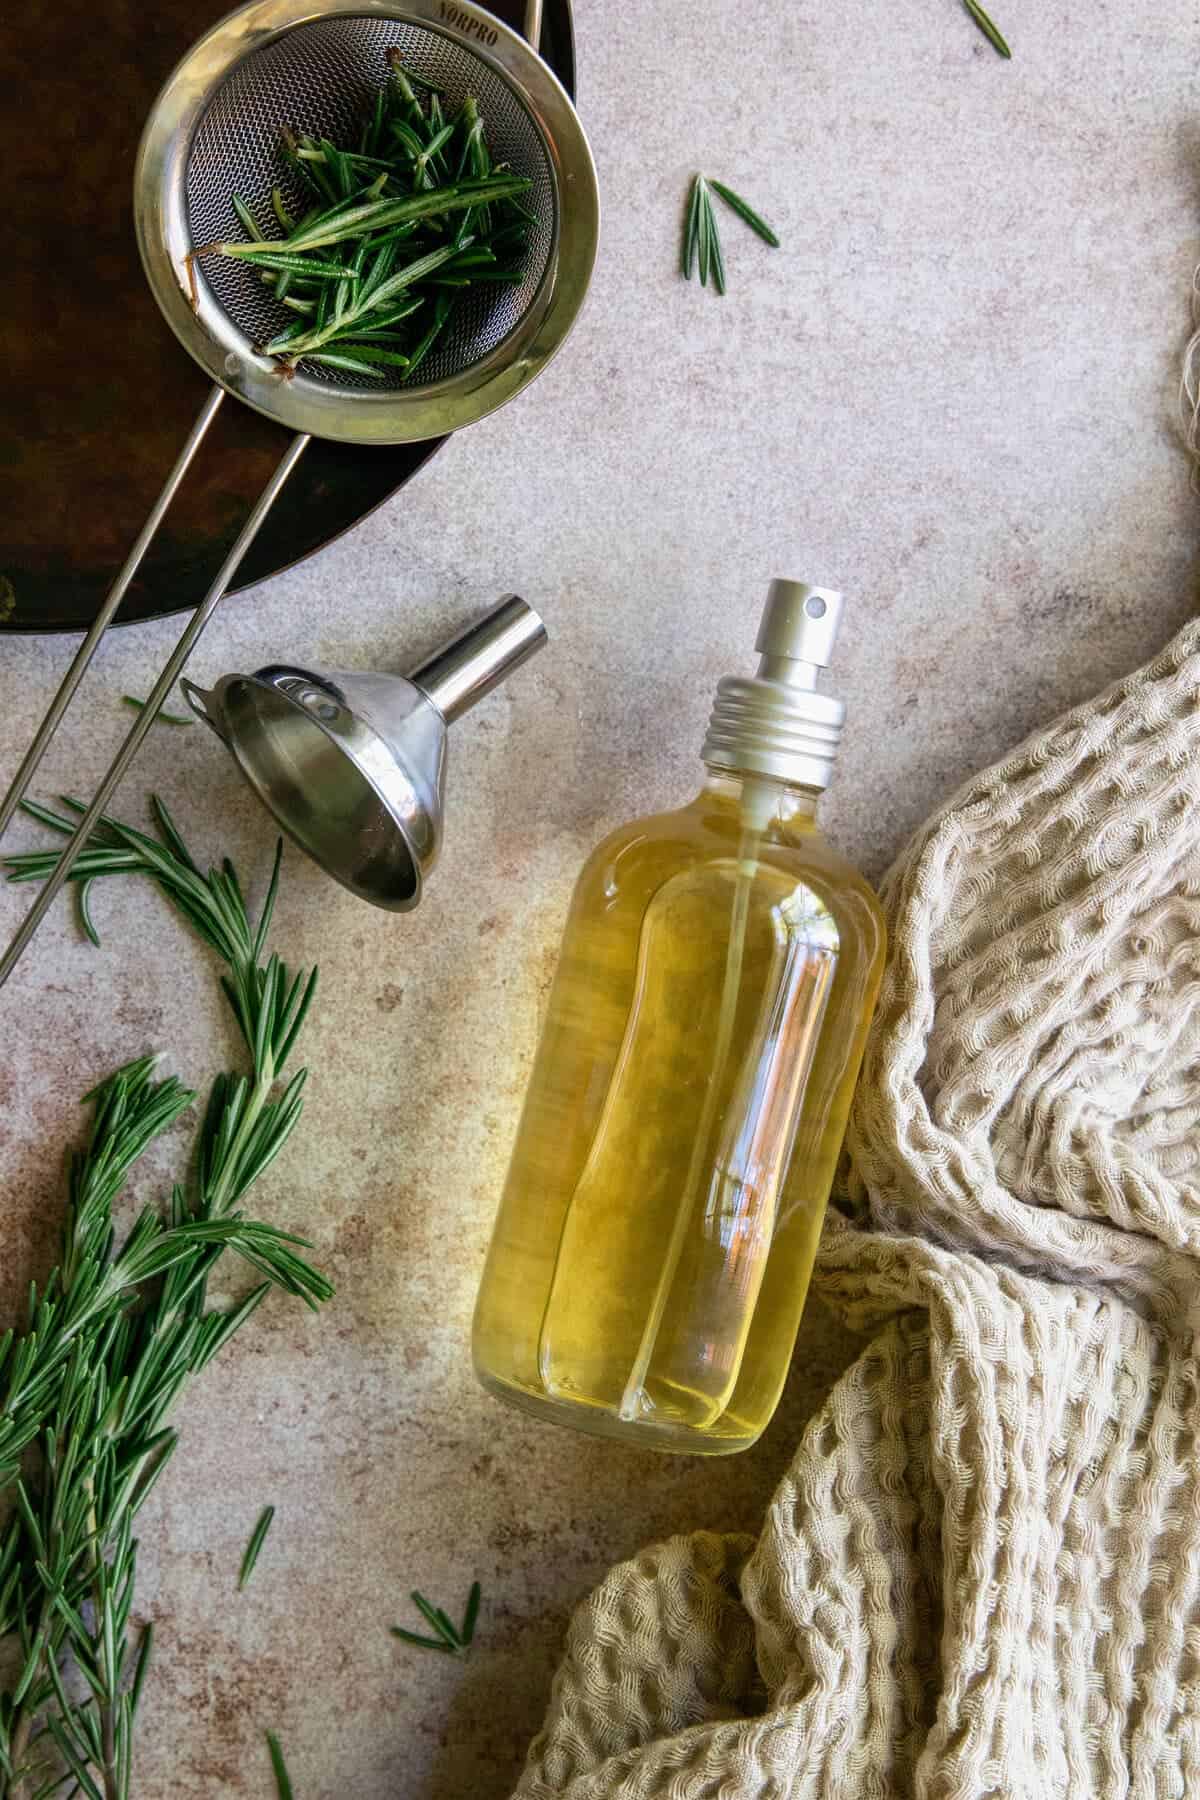 Strain out rosemary herbs and spritz rosemary water onto hair